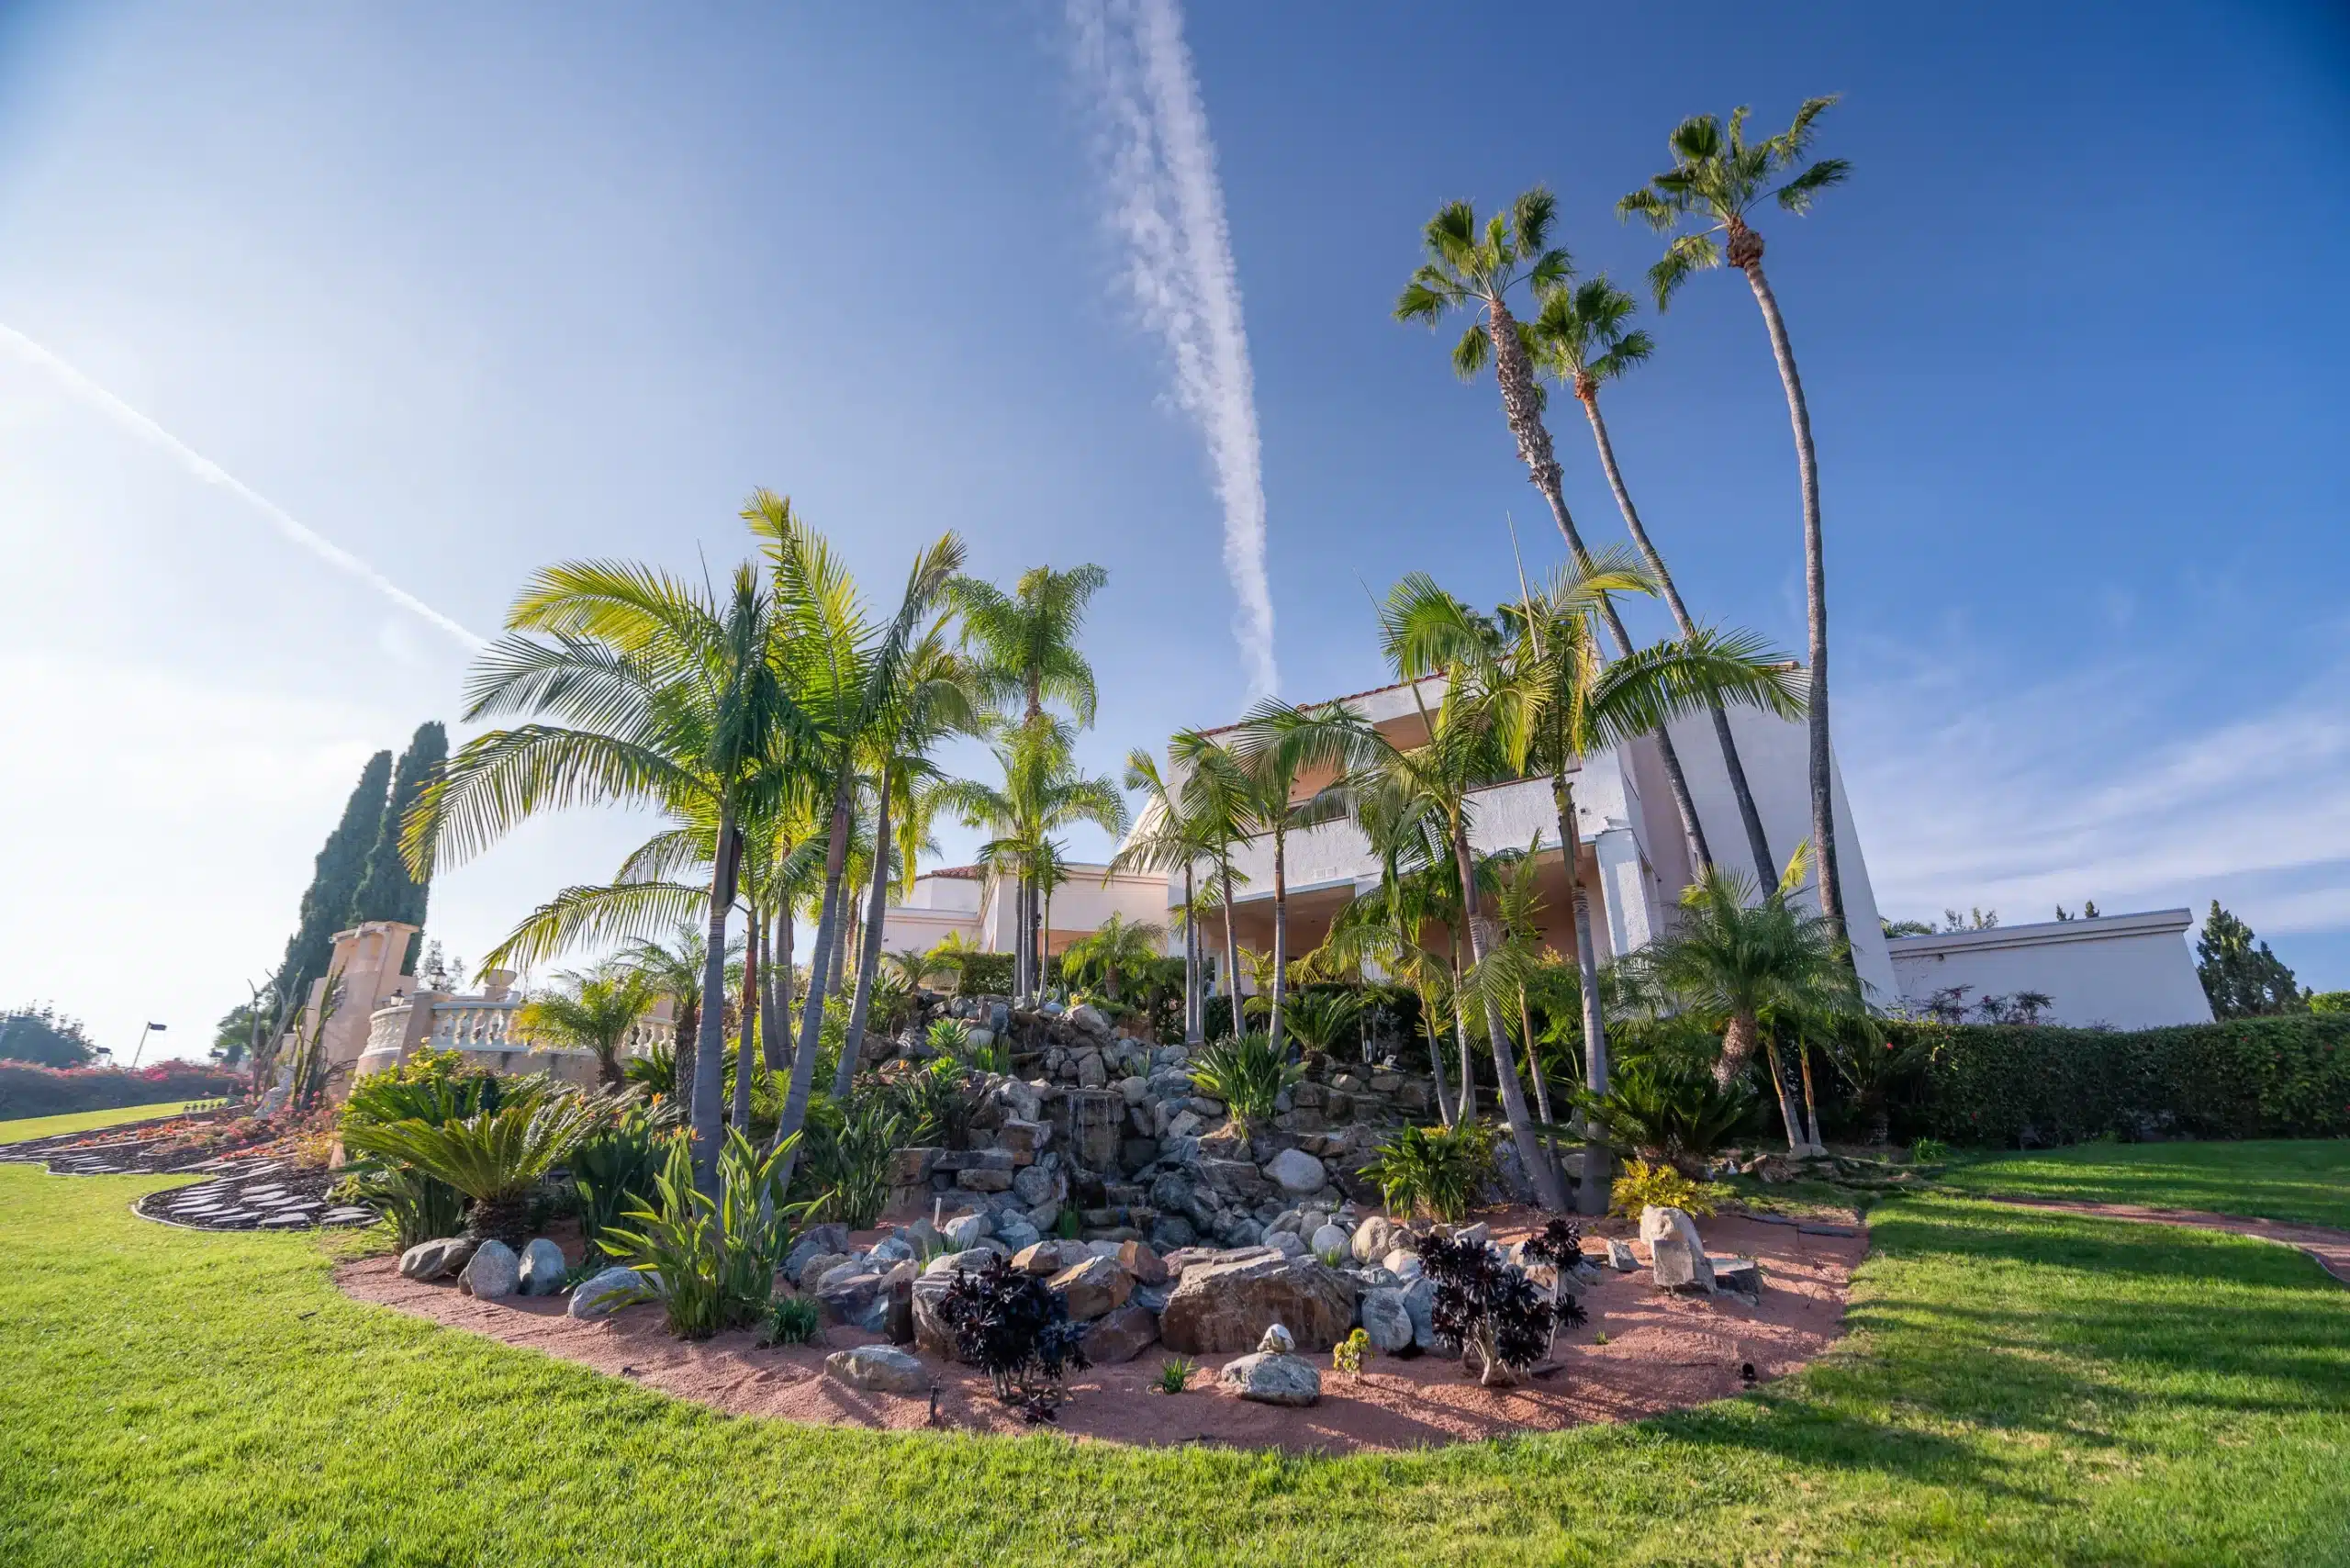 The front of our Villa Oasis rehabilitation center. There are many palm trees and flowers